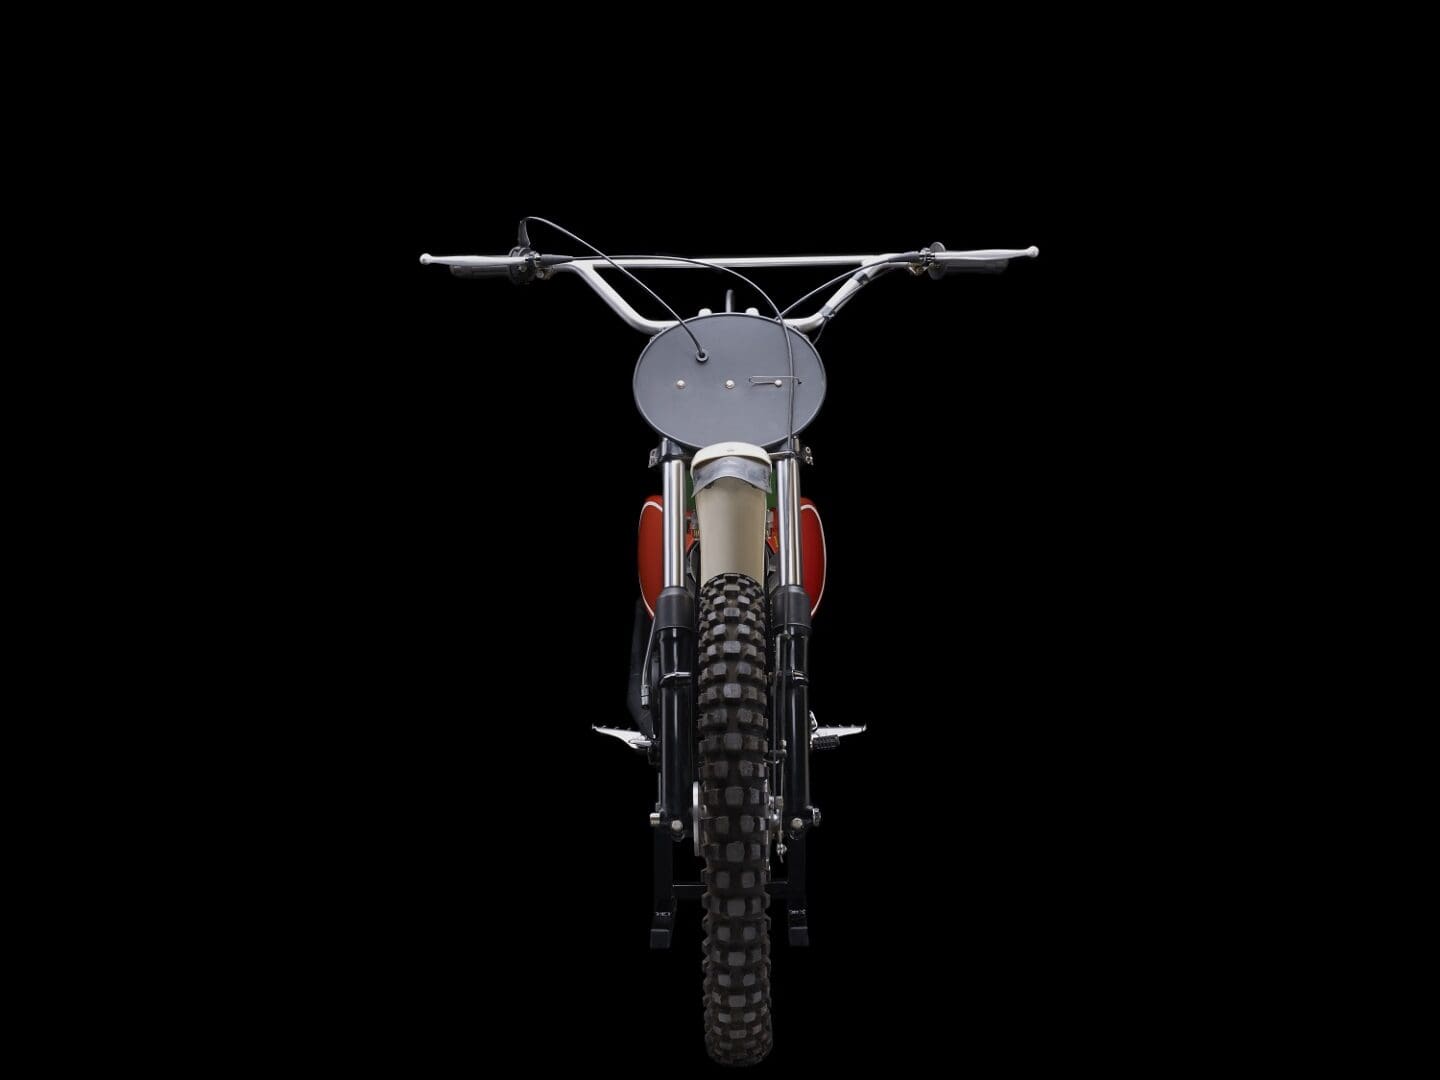 An image of a dirt bike on a black background.